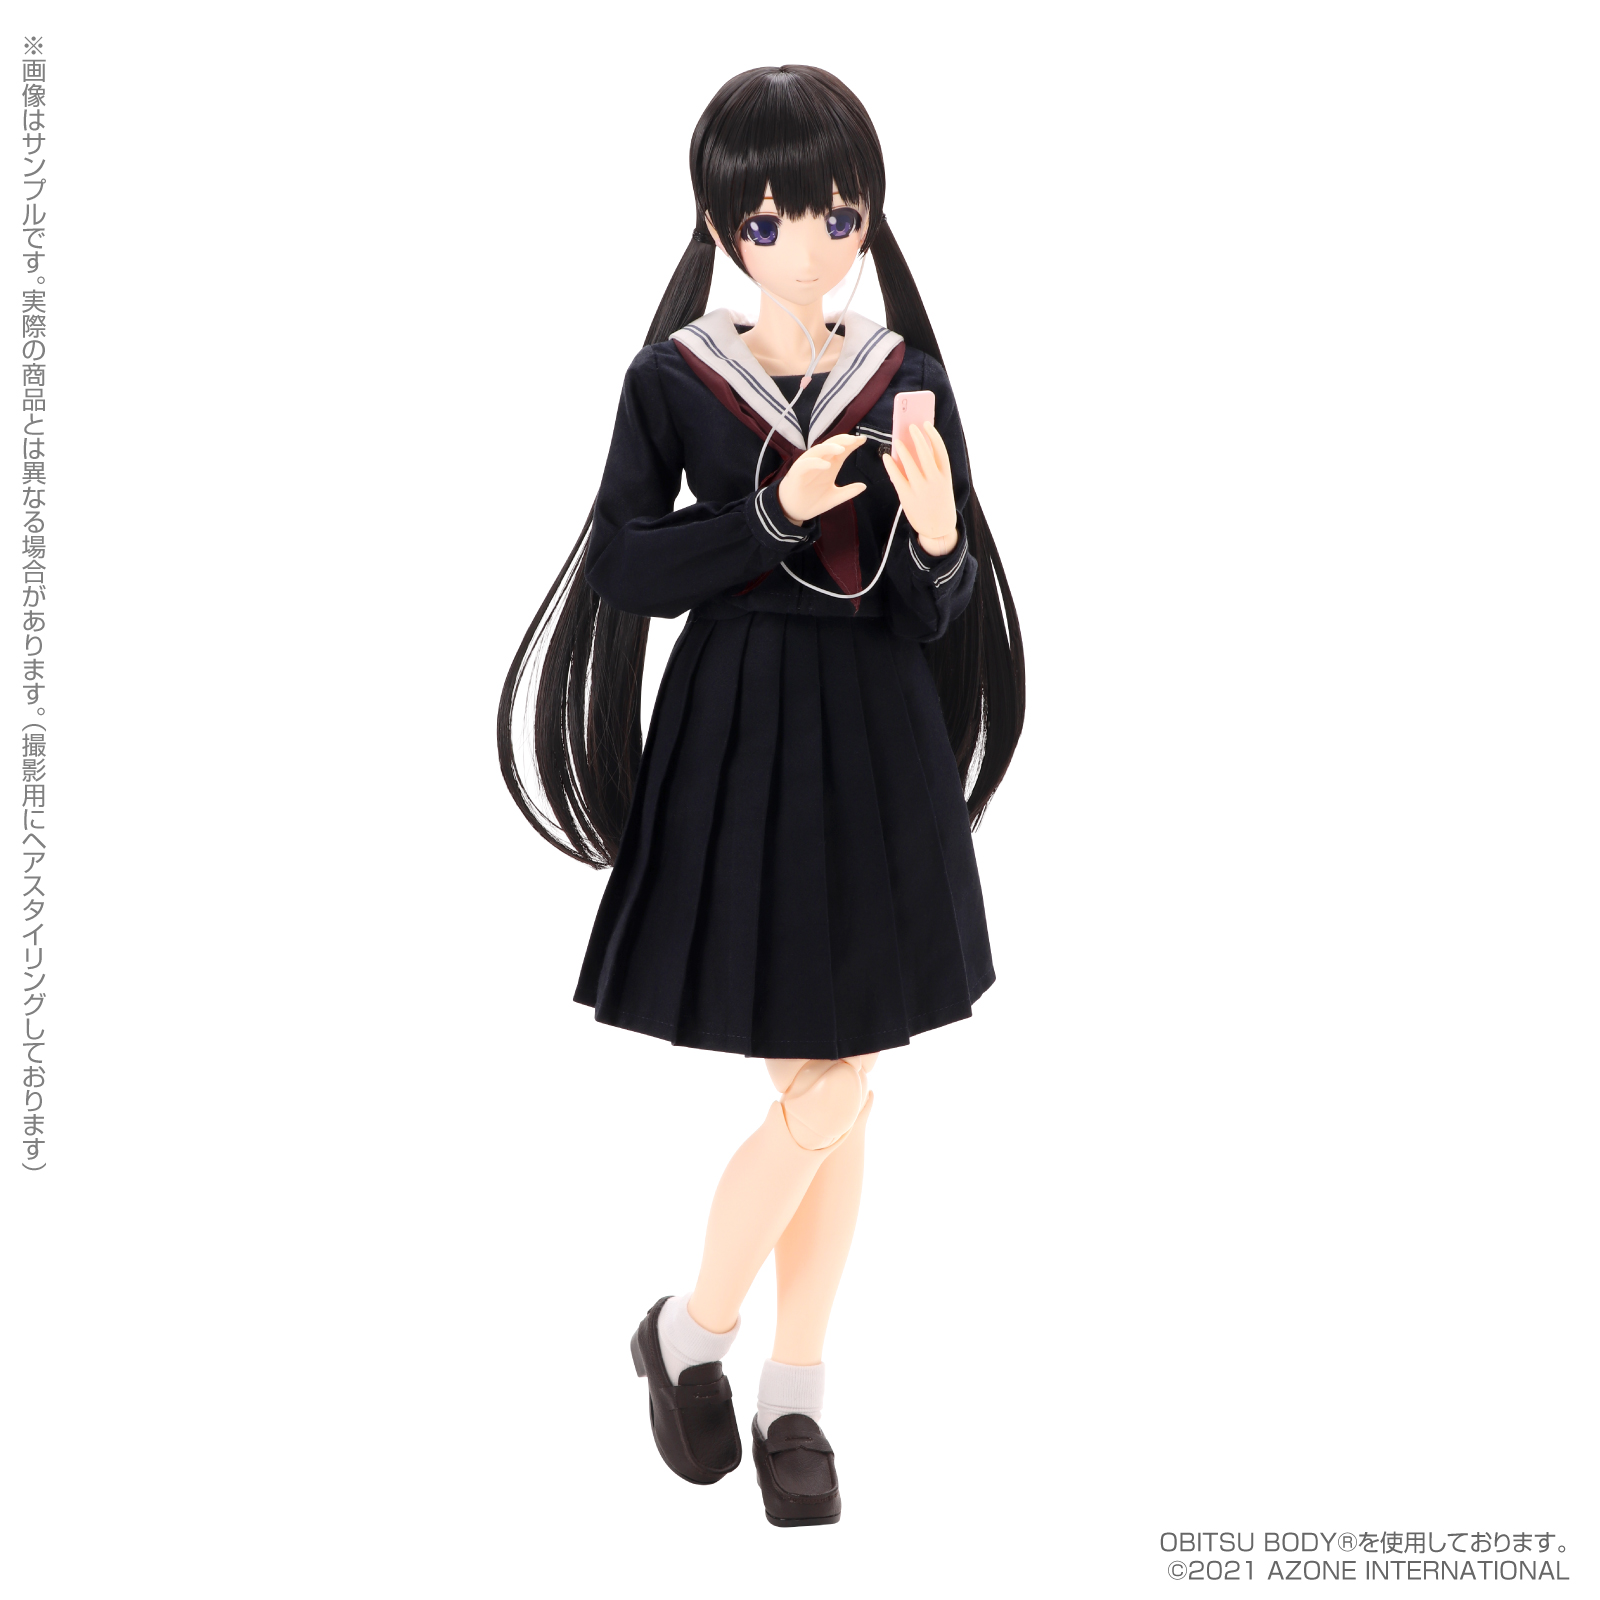 Happiness Clover 和遥キナ学校制服コレクション『和遥清心女子学園ver./まひろ』ハピネスクローバー 1/3 完成品ドール-003